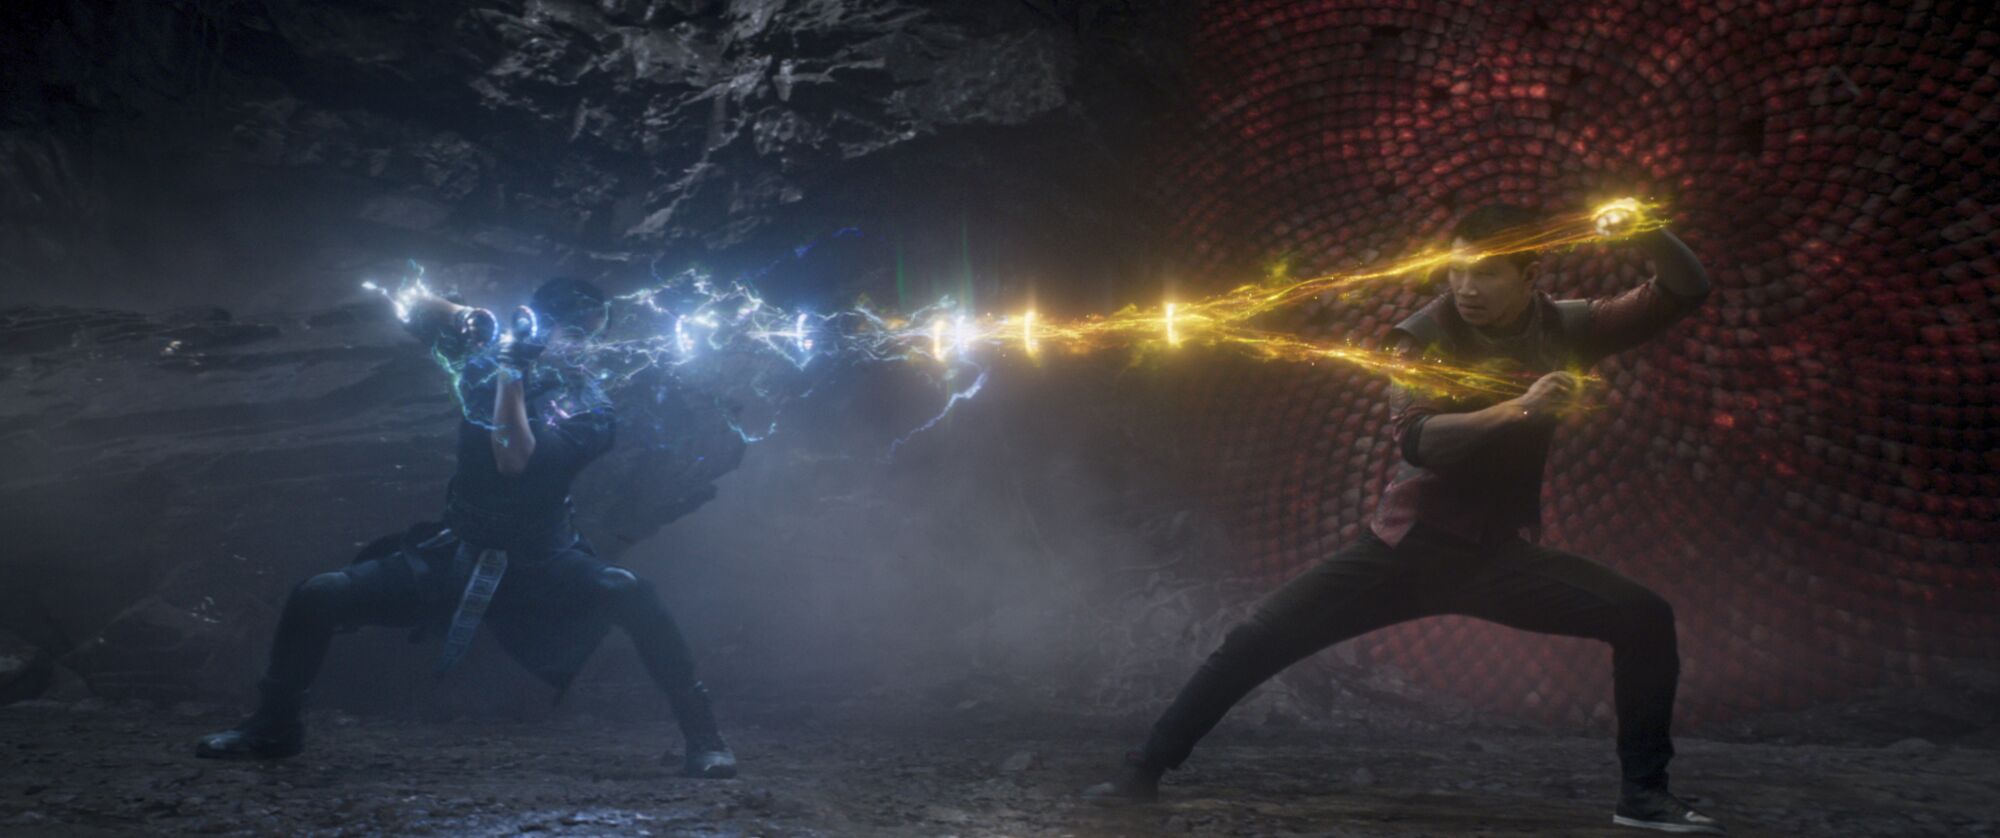 Tony Leung, left, and Simu Liu battle in a scene from “Shang-Chi and the Legend of the Ten Rings”